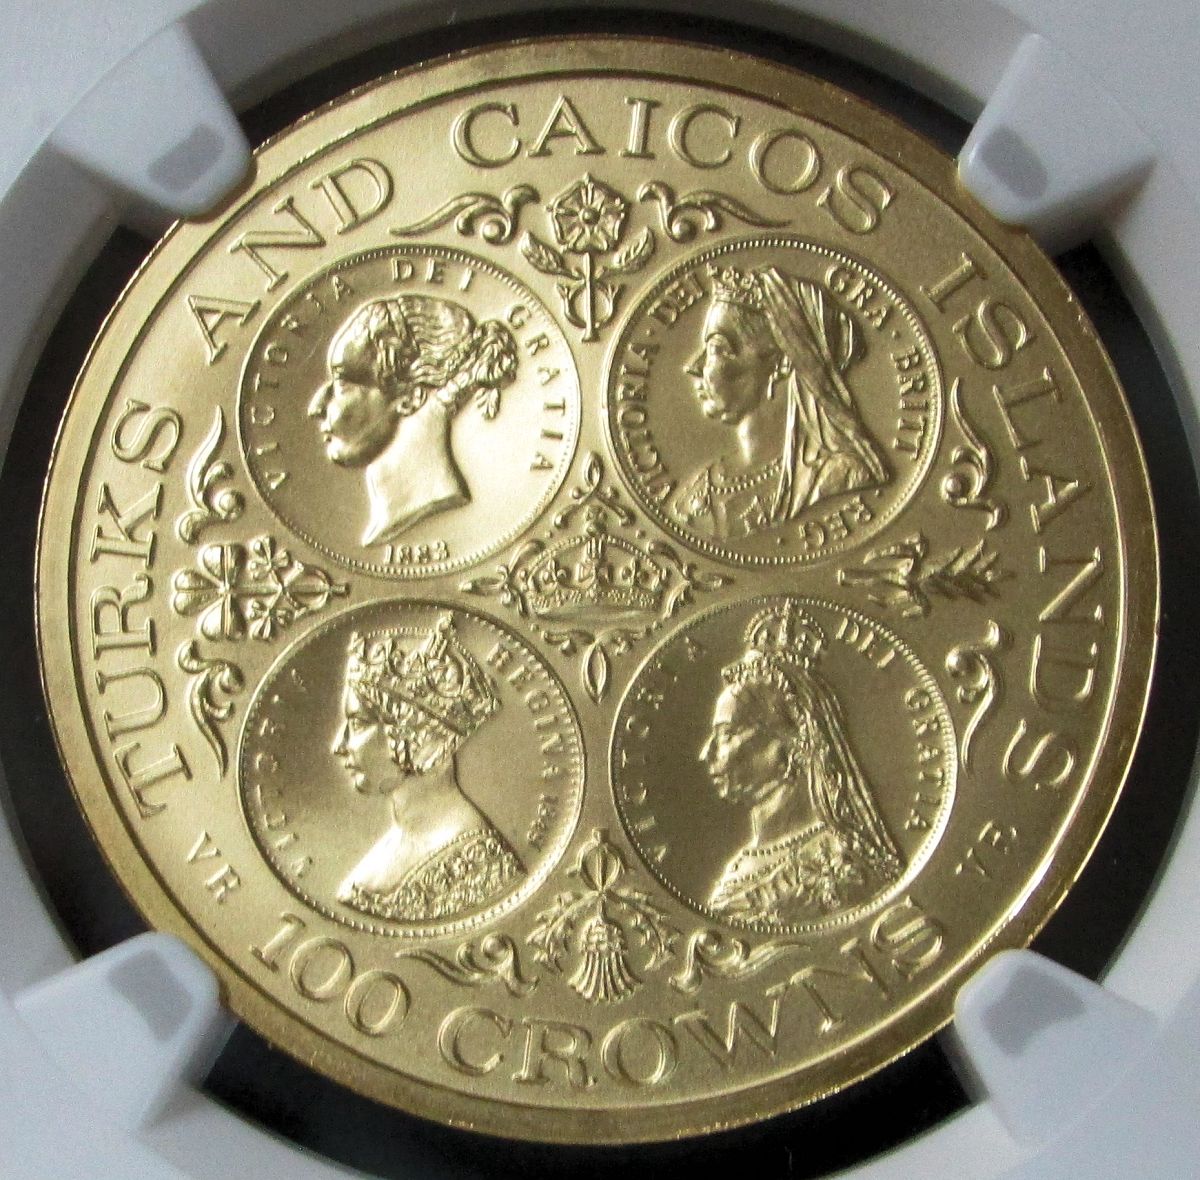 1976 Gold Turks Caicos Islands 100 Crowns Ngc Mint State 68 Only 250